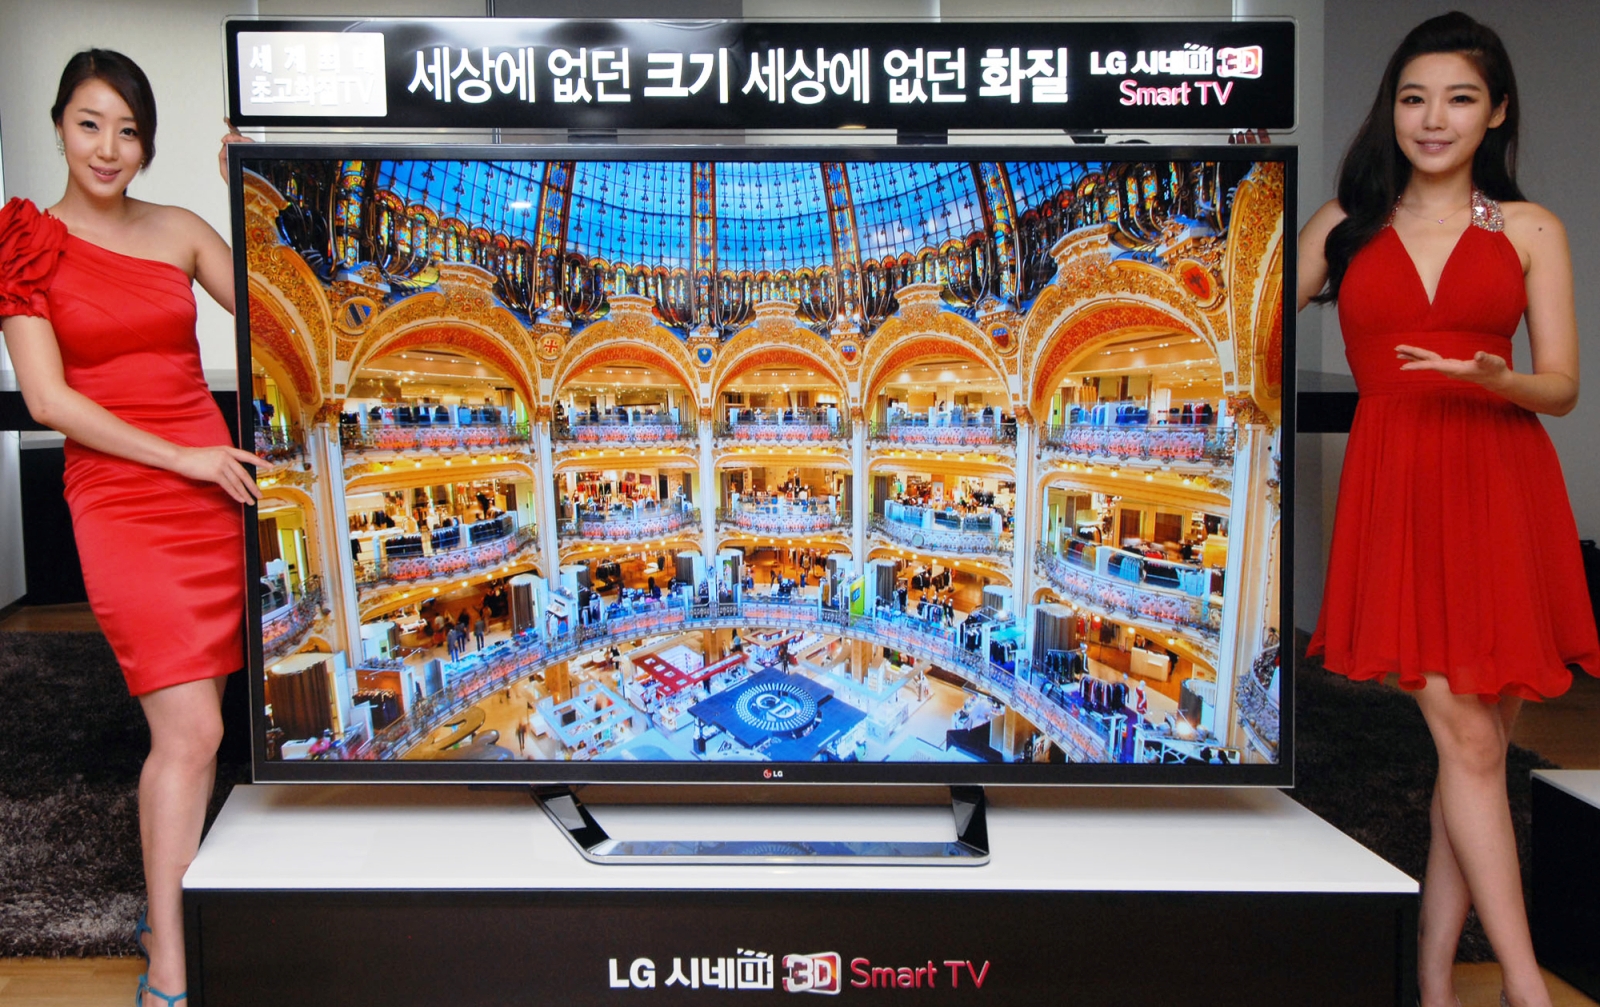 Two models posing at either side of the world’s first 84-inch Ultra Definition 3D TV by LG